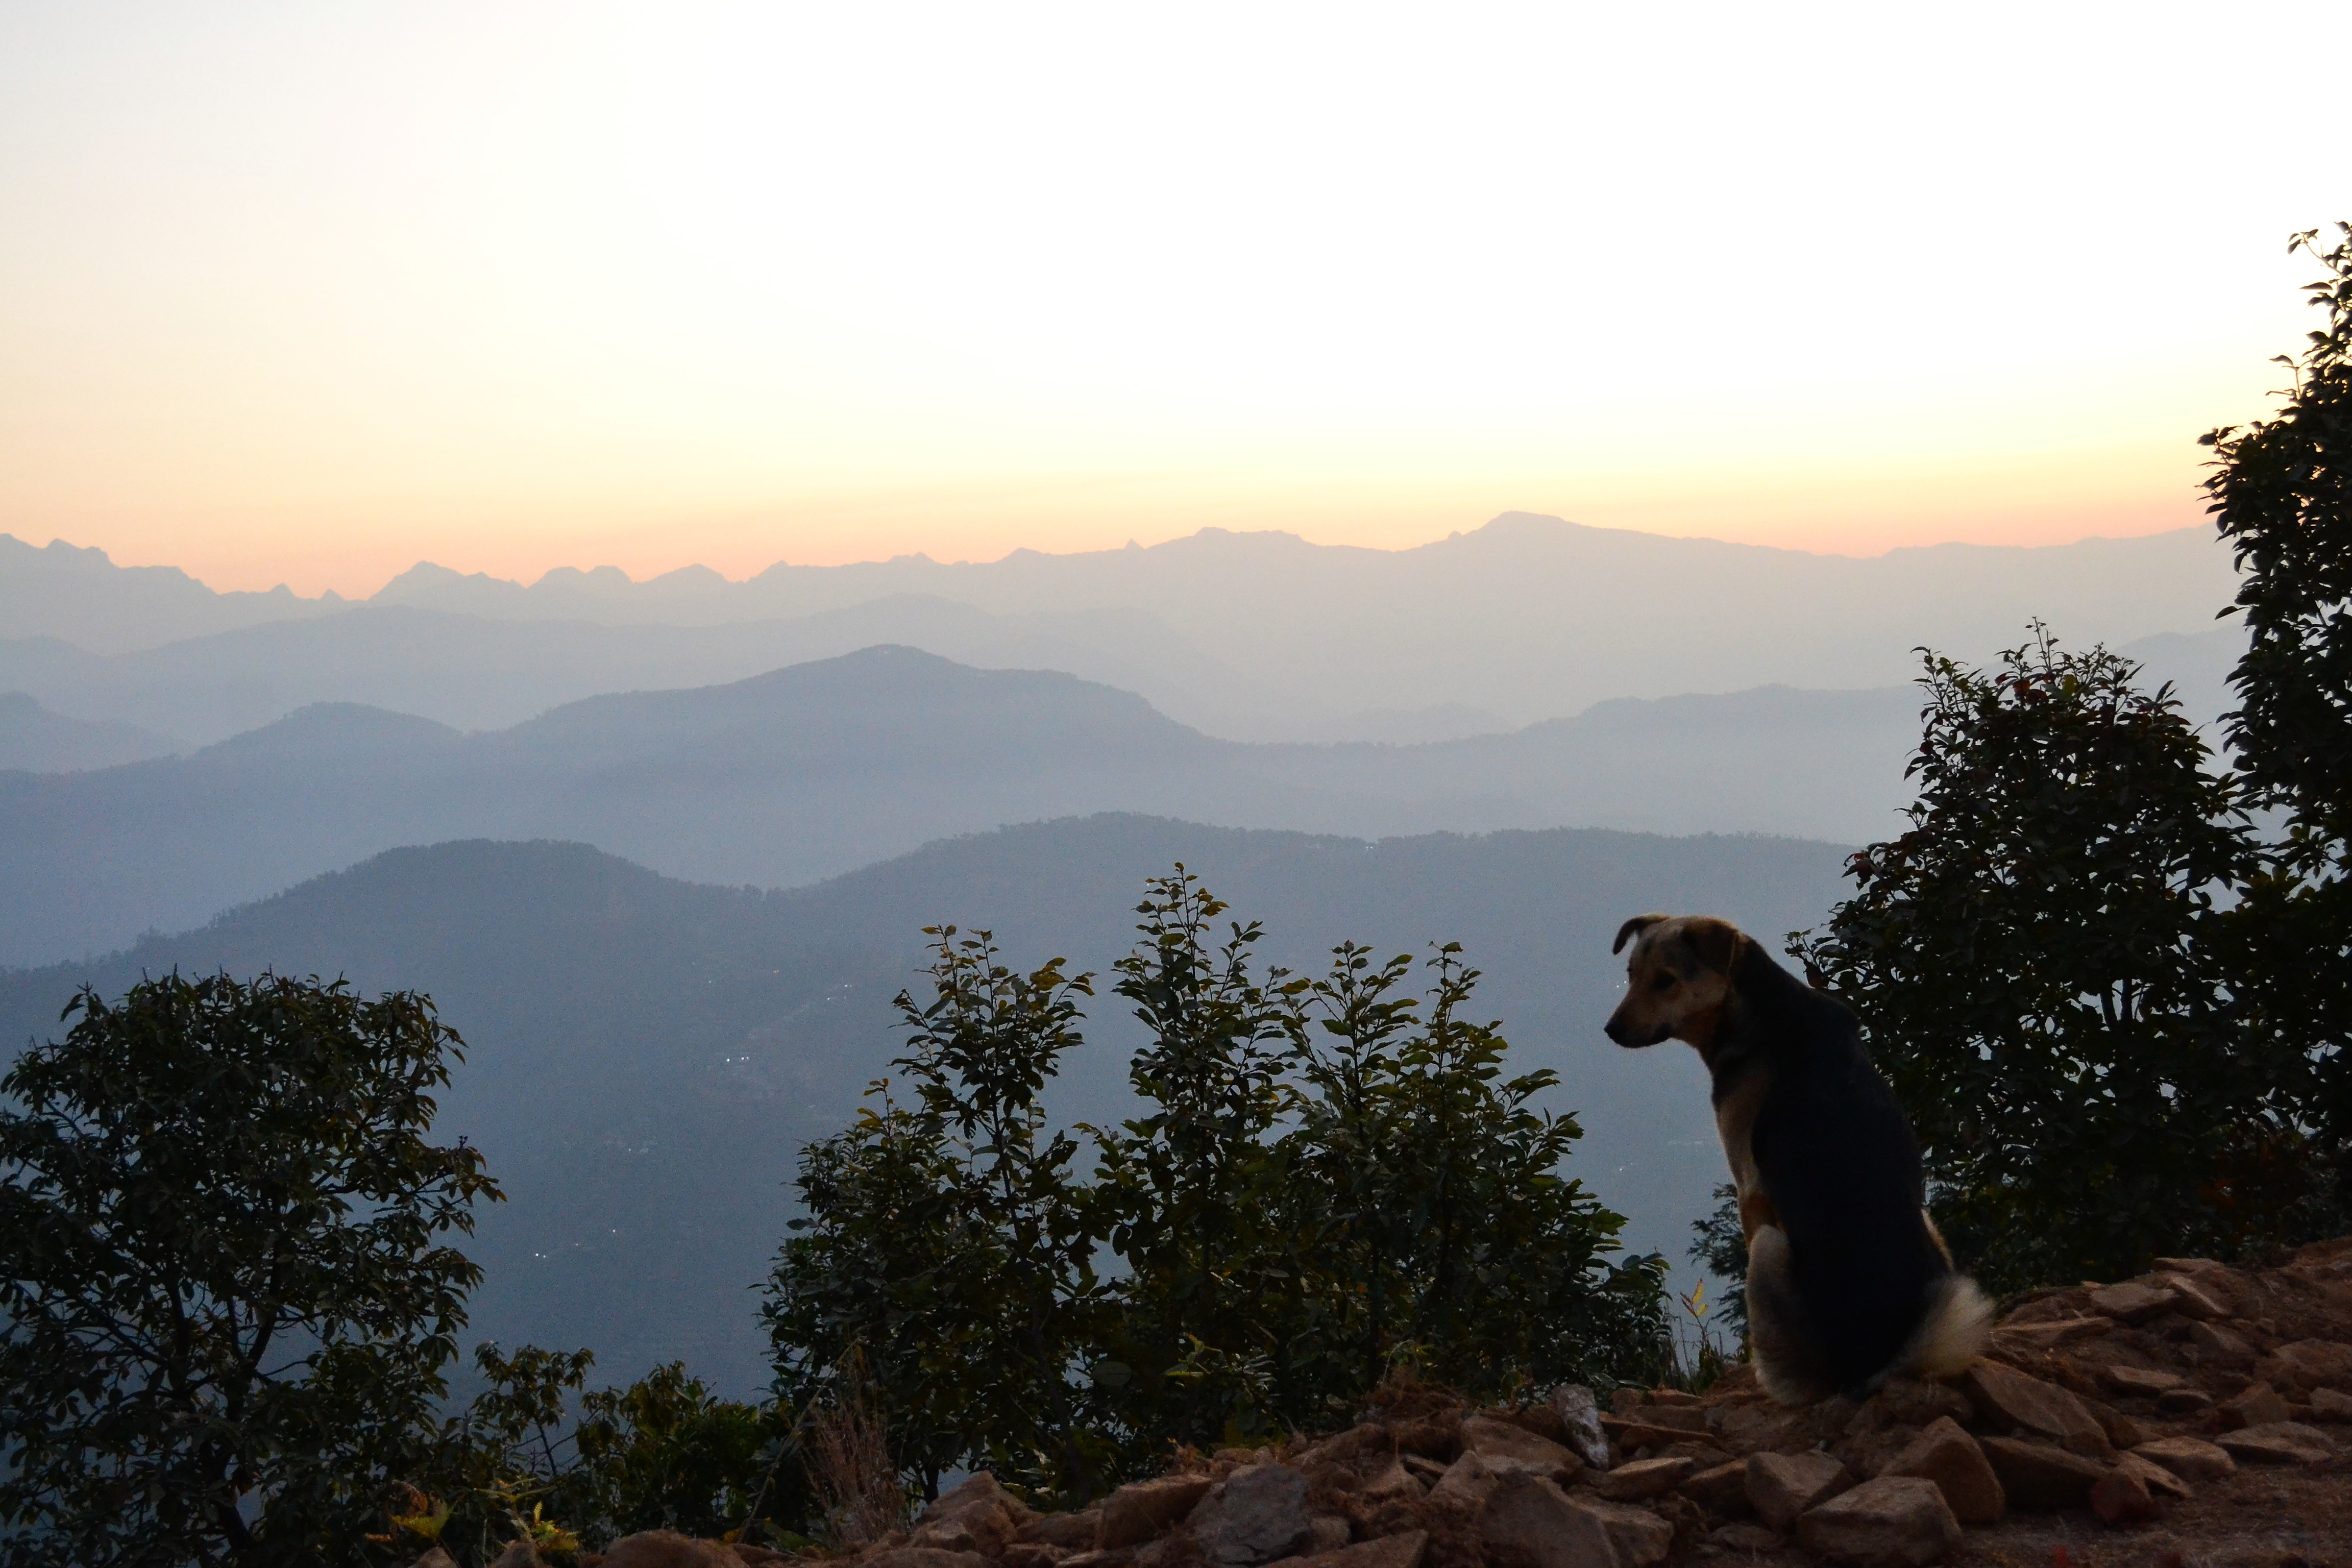 Kavita, the camp dog, reflecting on what's to come in 2019.